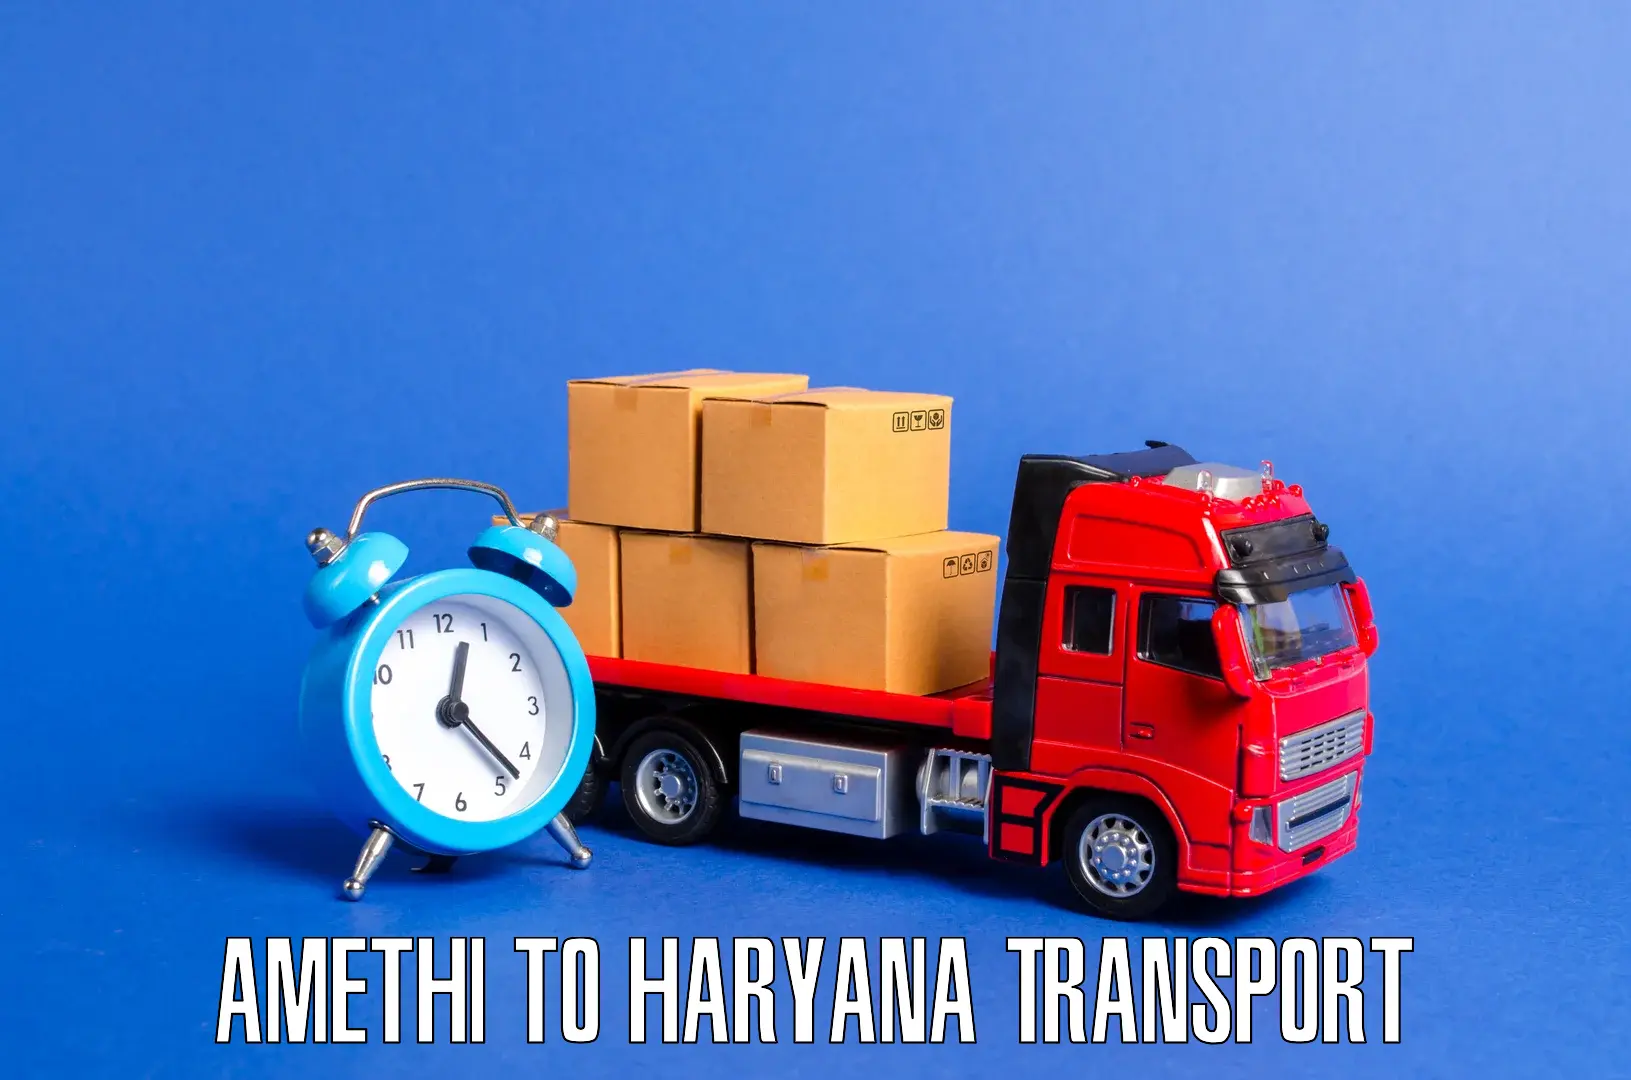 Material transport services Amethi to Panipat